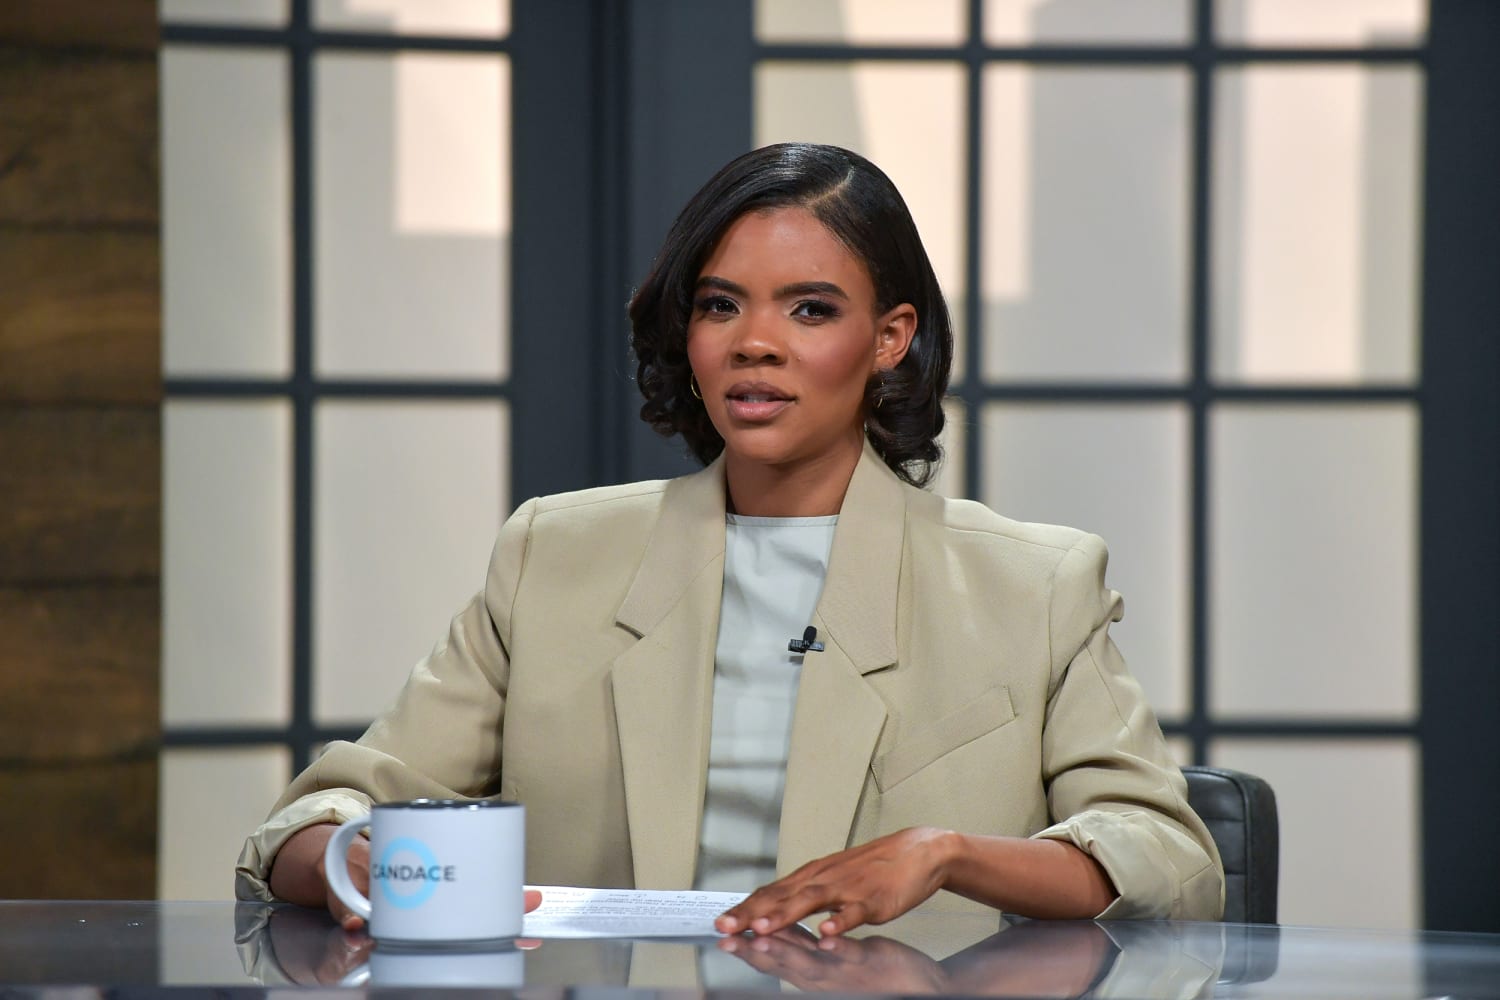 YouTube demonetizes Candace Owens anti-trans videos, says misgendering part of hateful conduct policy